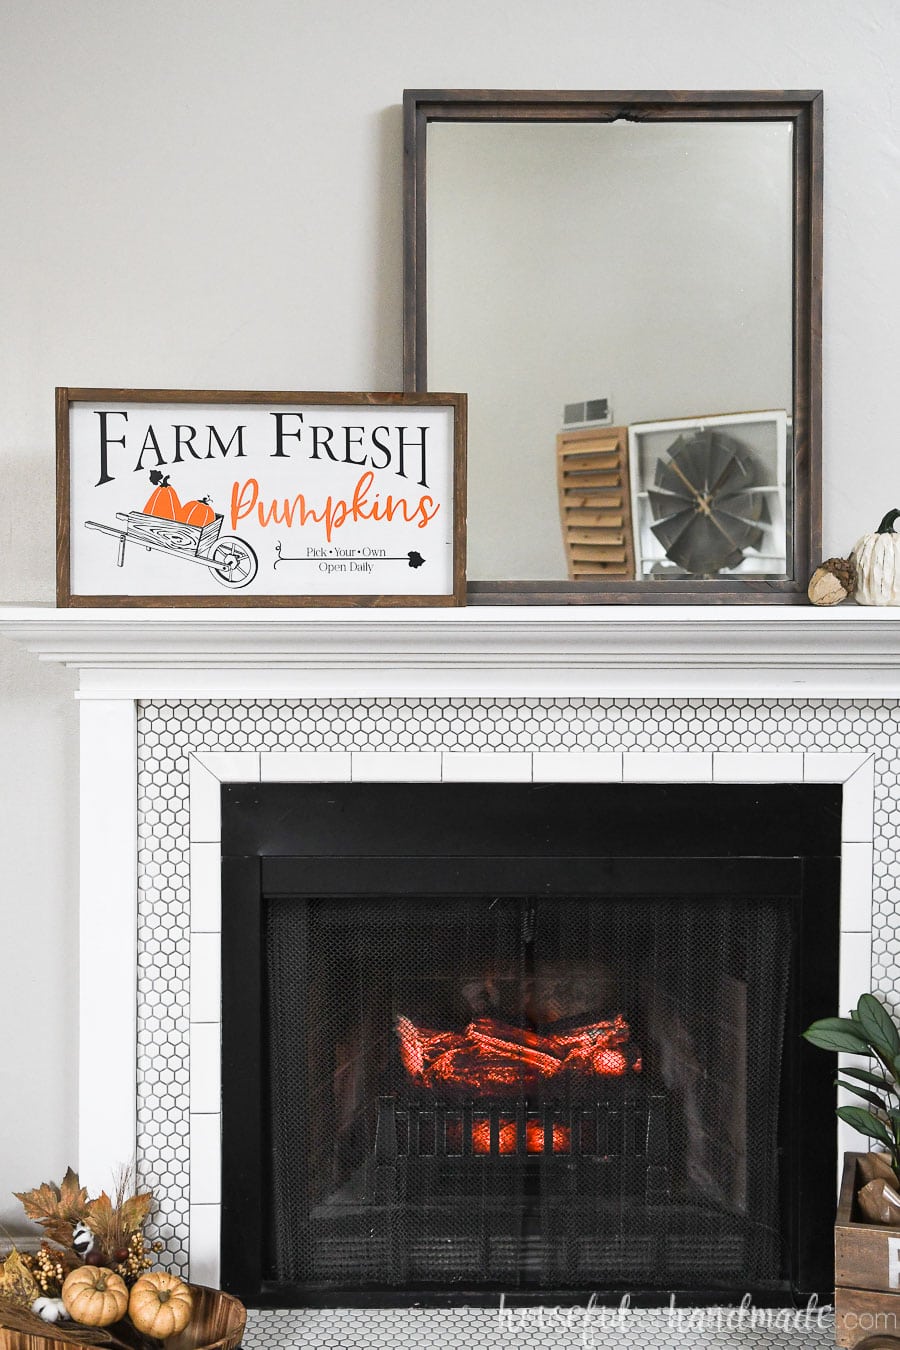 Mantel with fall decoration on it: a wood pumpkin patch sign, pumpkin, acorn, mirror, and fall leaves.